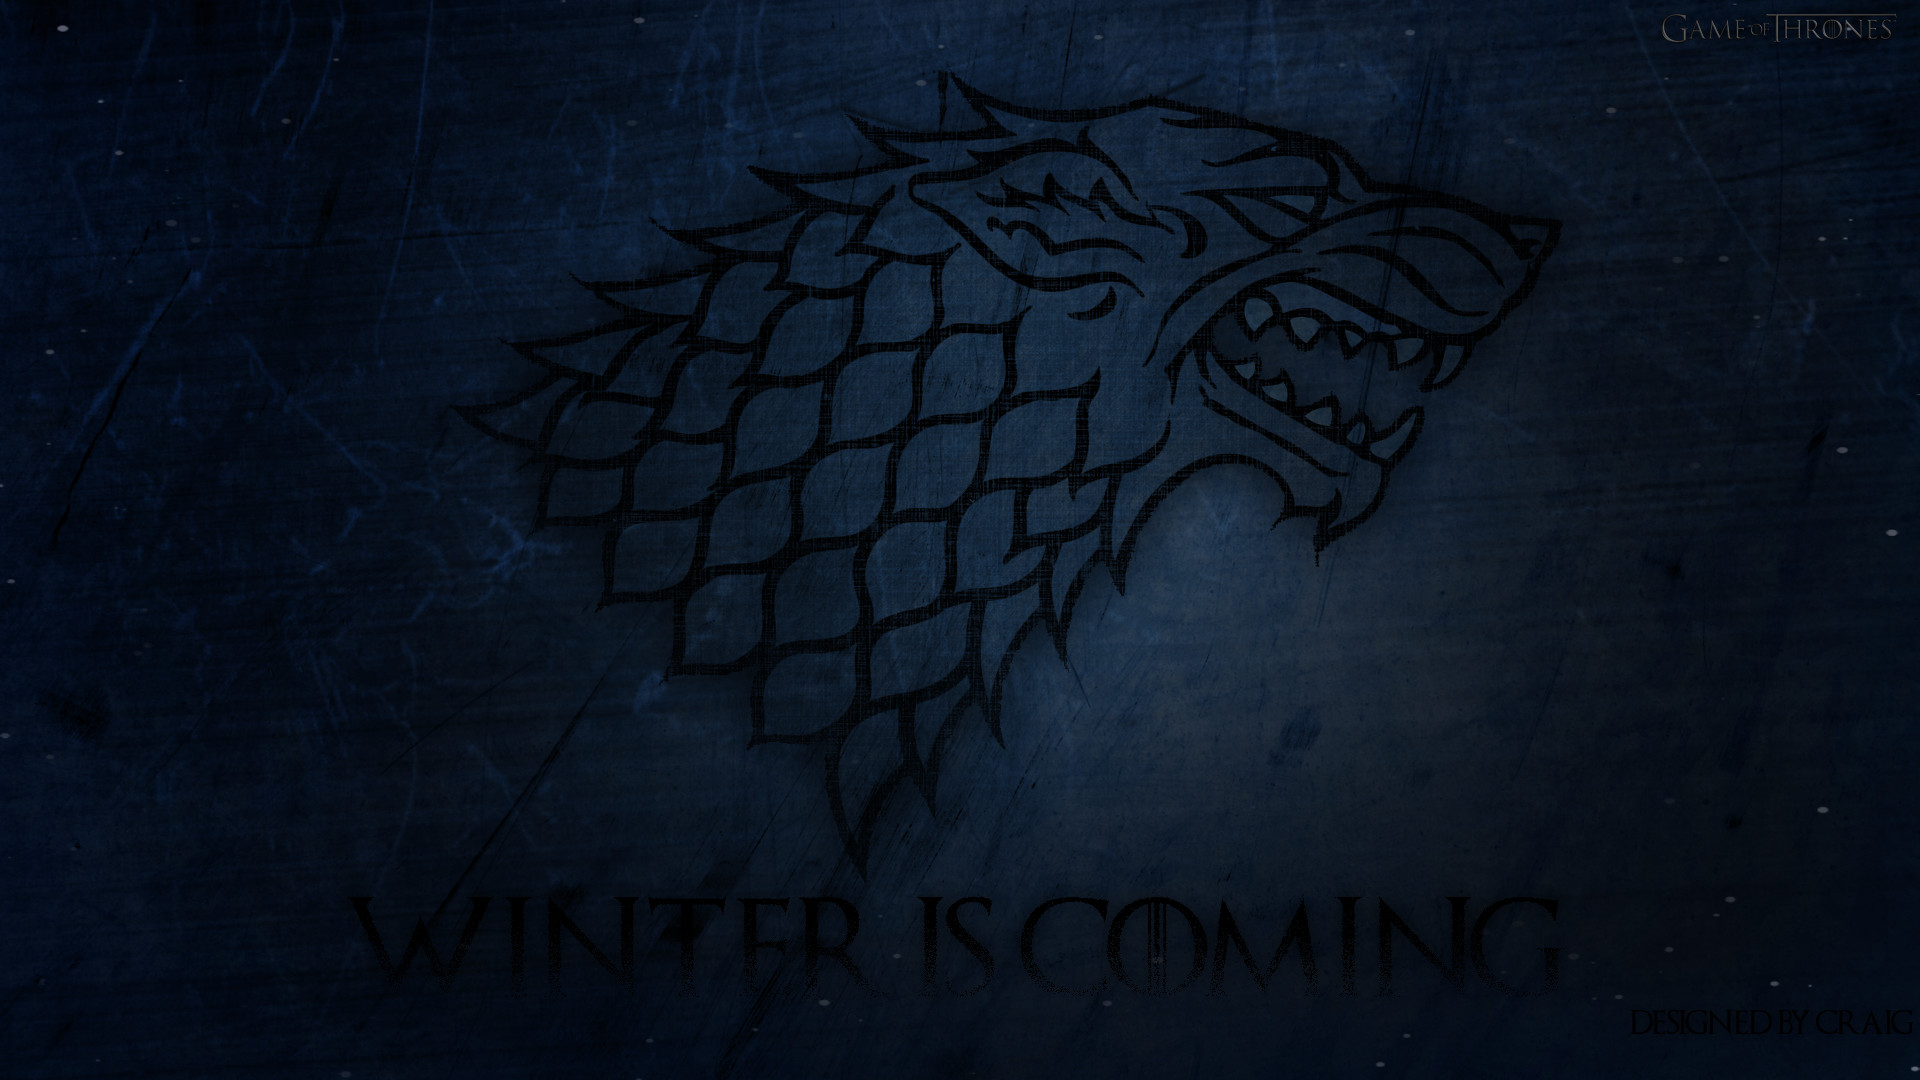 1920x1080 ... Winter Is Coming (Wallpaper) by ThatCraigFellow